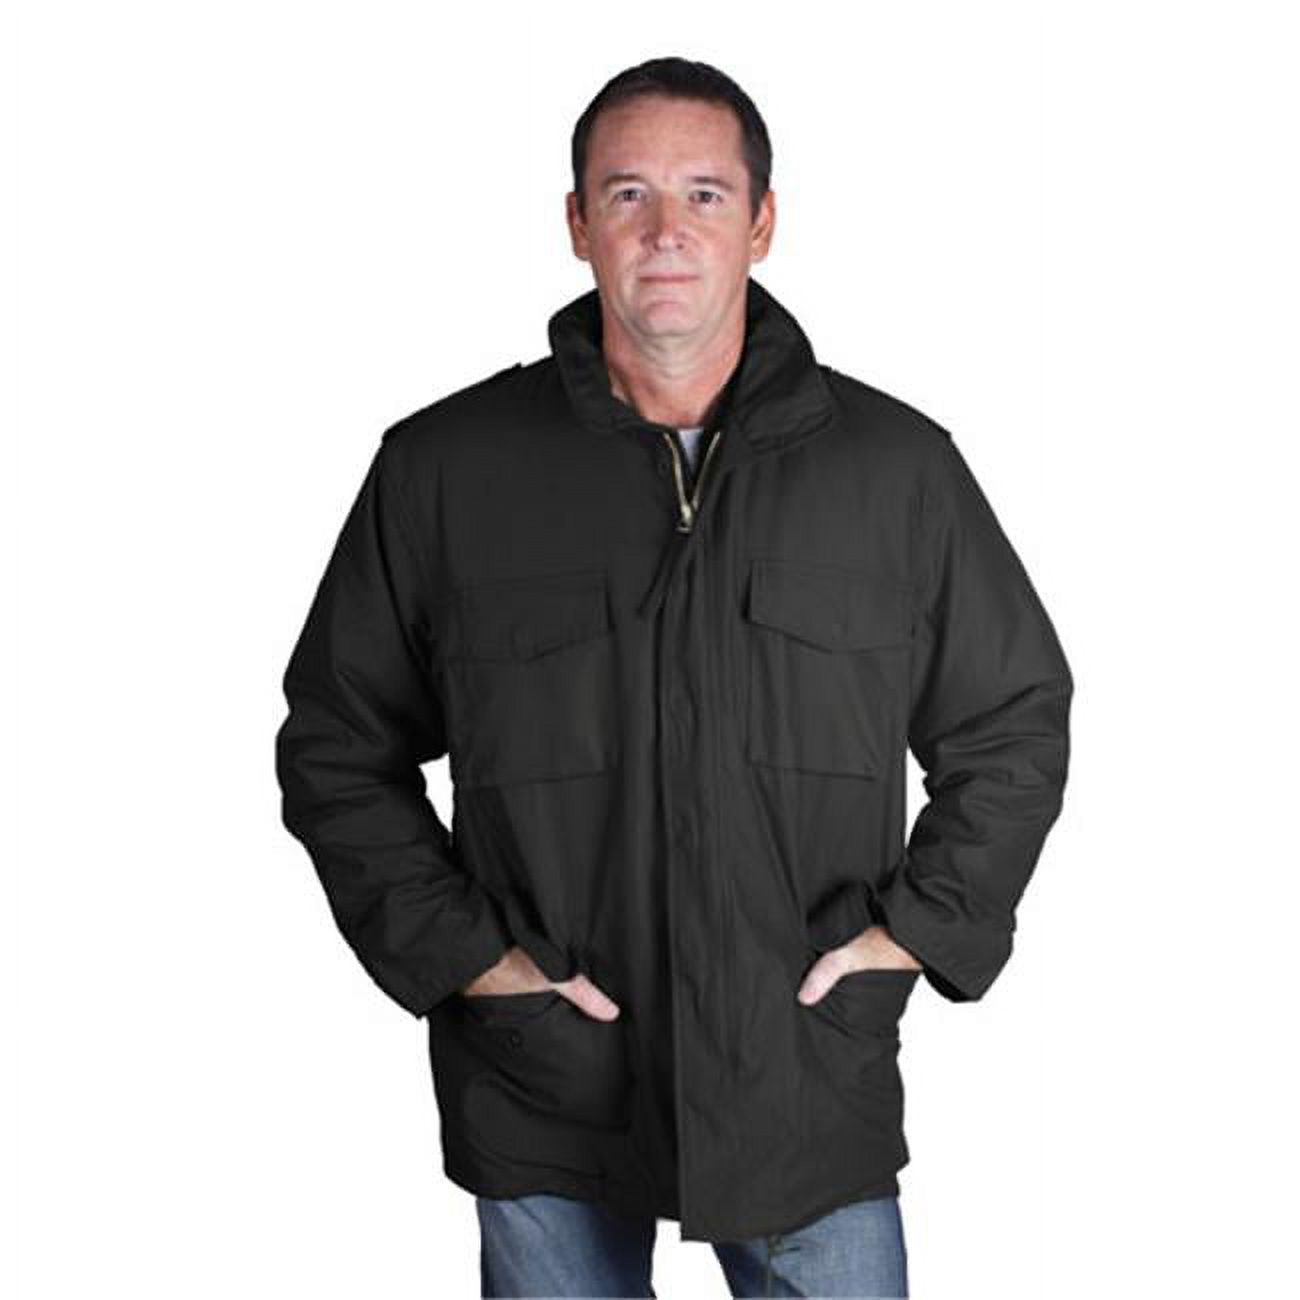 M65 Field Jacket with Liner - image 1 of 1